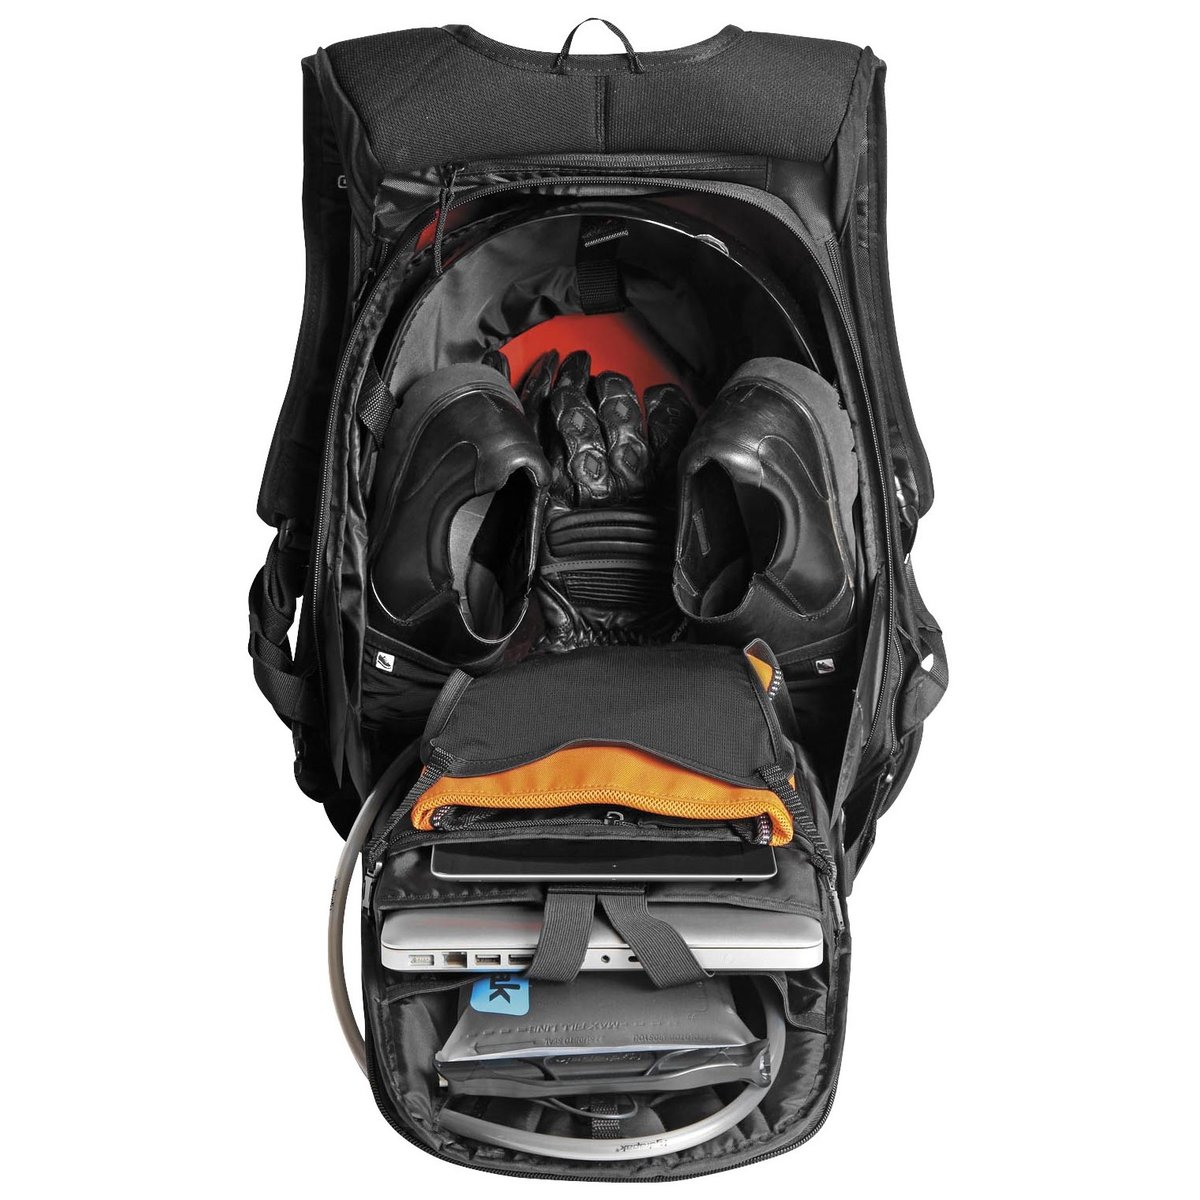 OGIO No Drag Mach 5 Motorcycle Backpack - Stealth Black , 20.5" H x 14.5" W x 7" D, Medium - image 2 of 2